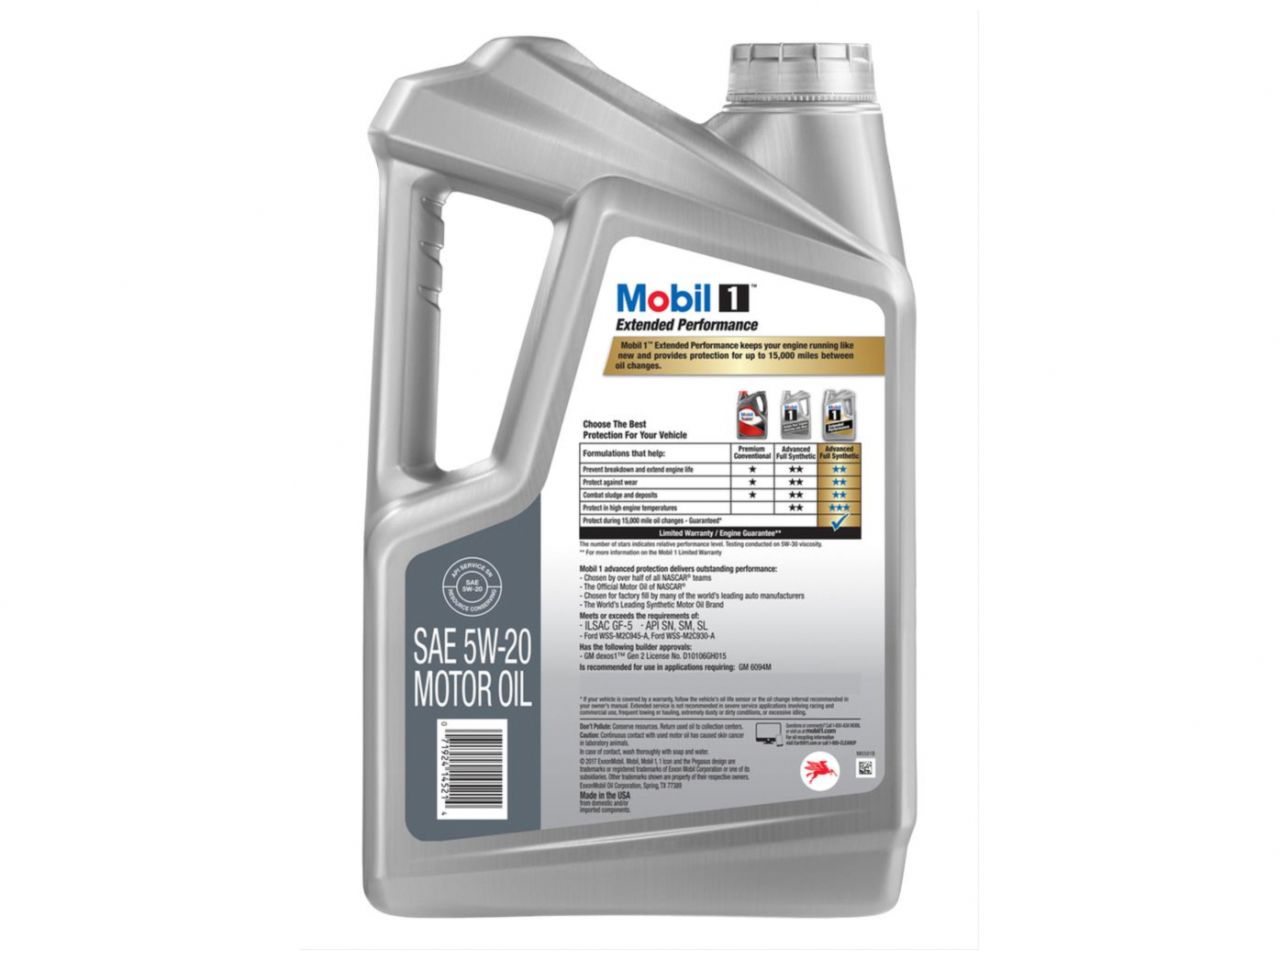 Mobil Motor Oil, Extended Performance, Synthetic, 5W20, 5 Qts., Each